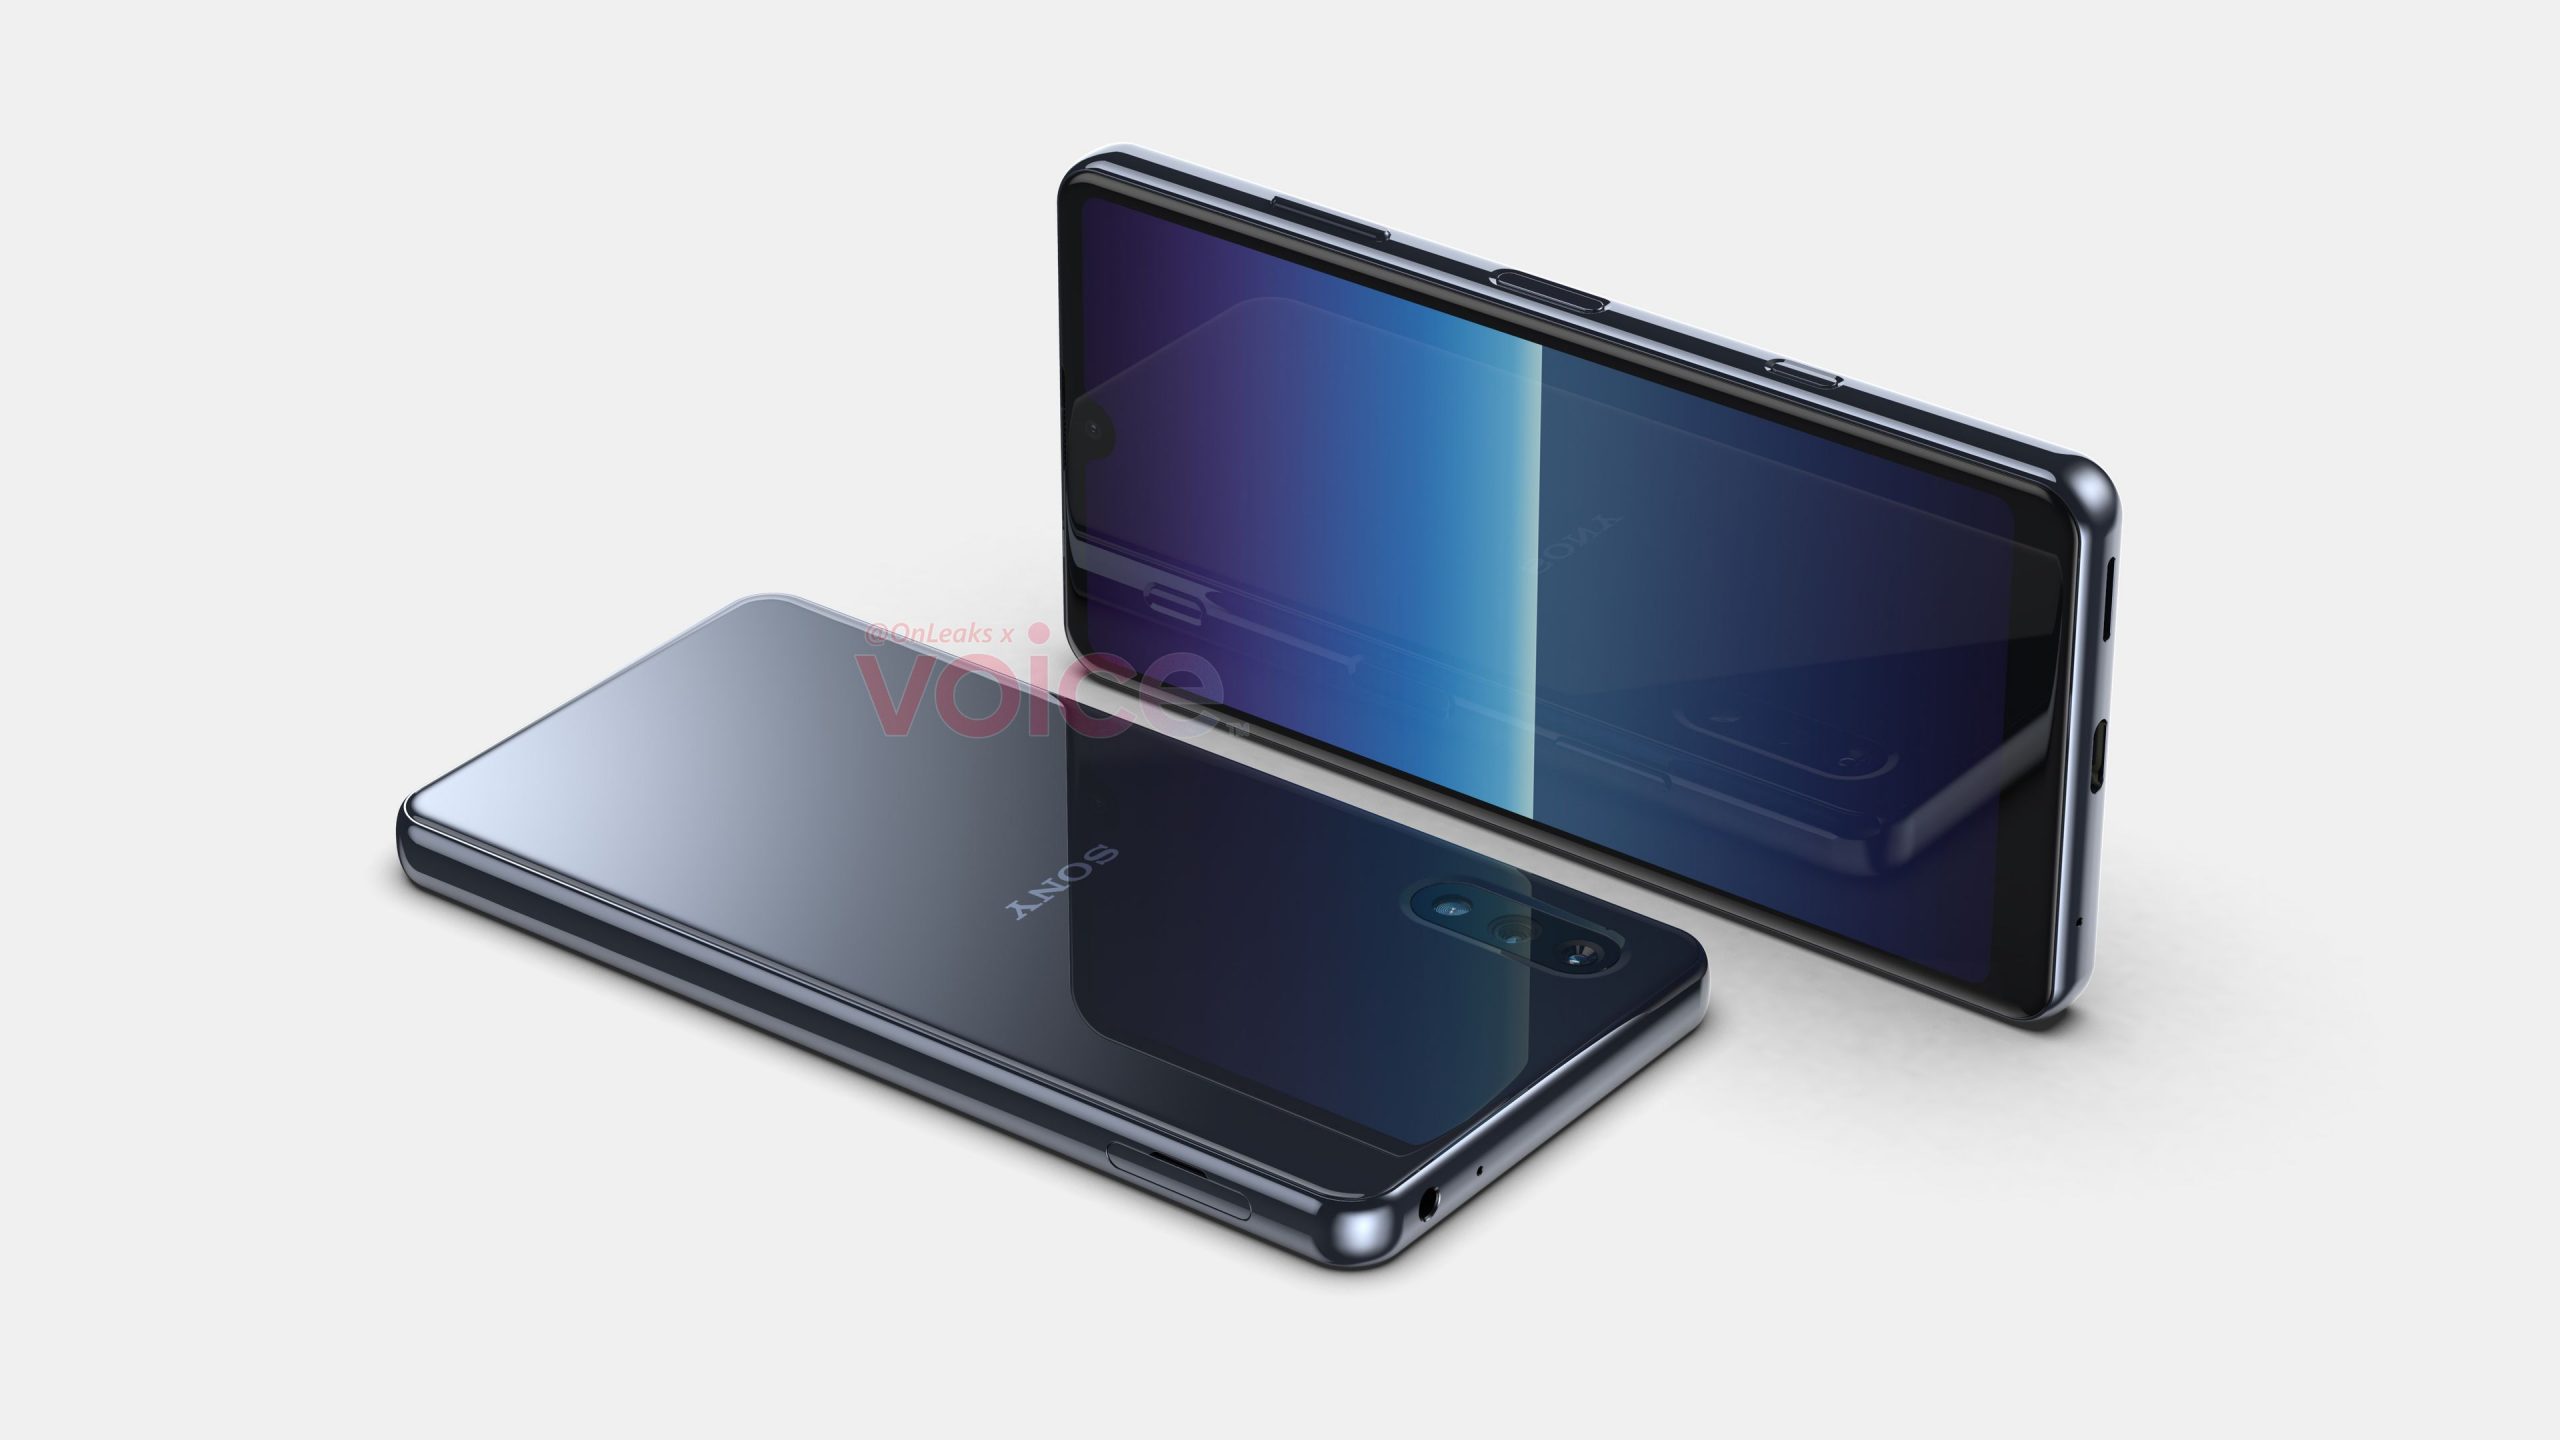 Sony Xperia Ace 2 compact phone to arrive with Snapdragon 690